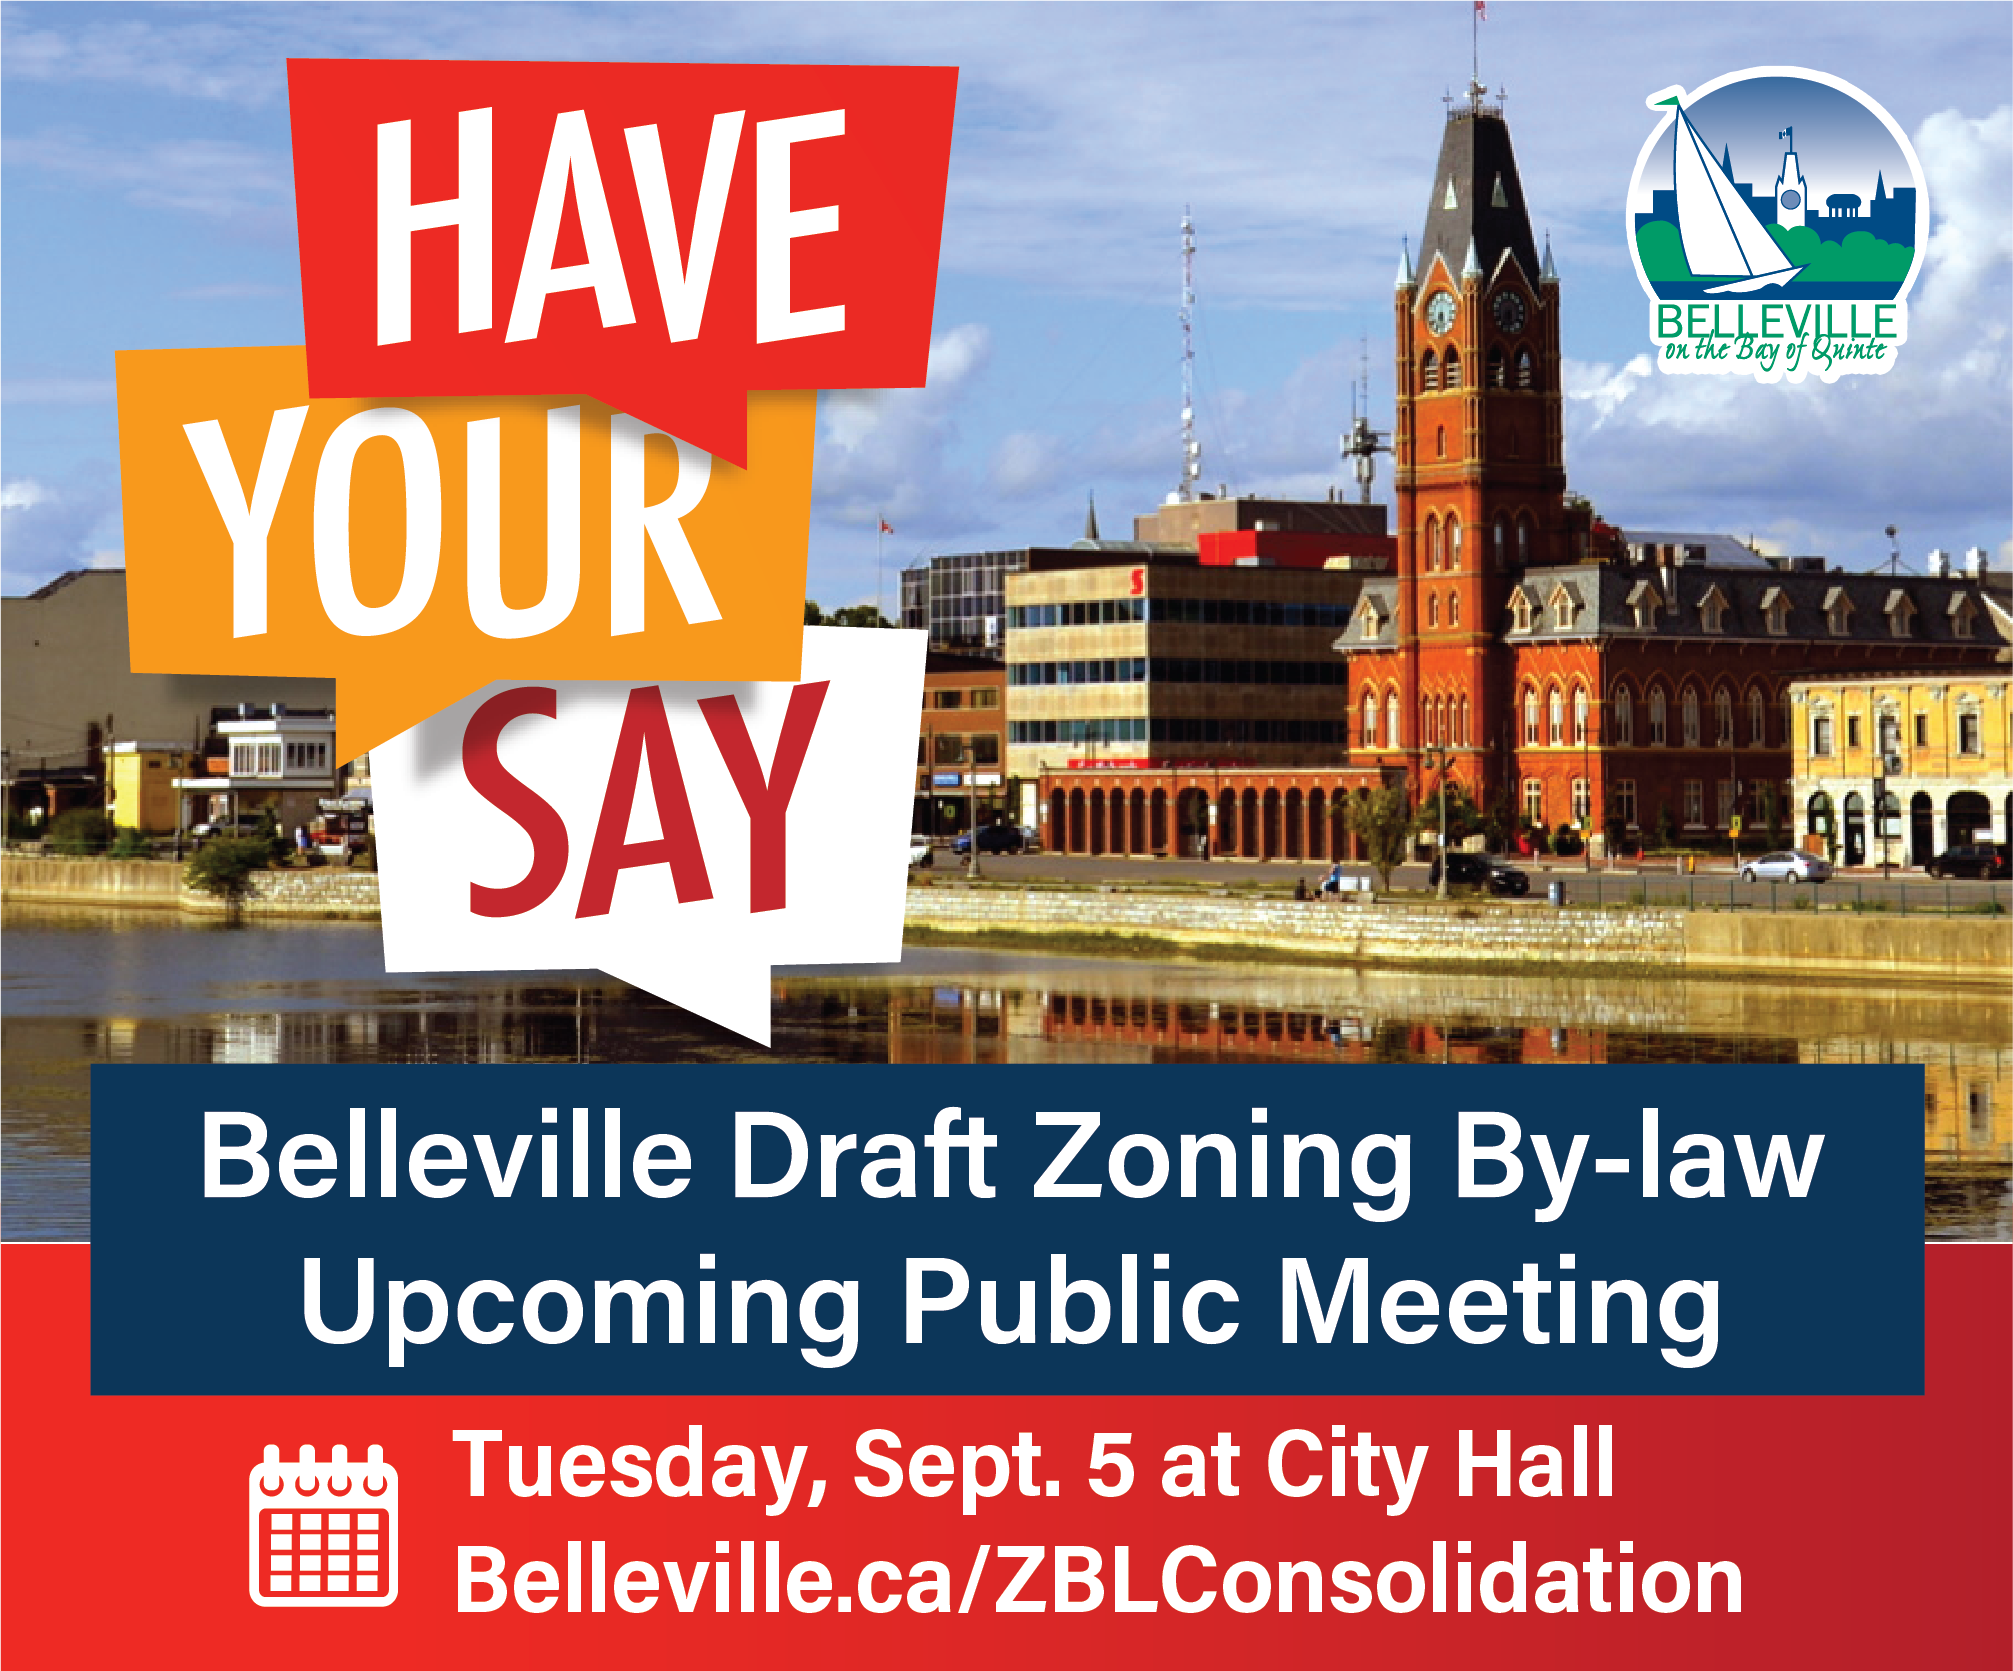 Graphic for the upcoming Zoning By-law Consolidation Public Meeting on September 5 at 5:30 p.m. in Council Chambers on the 4th floor of City Hall.